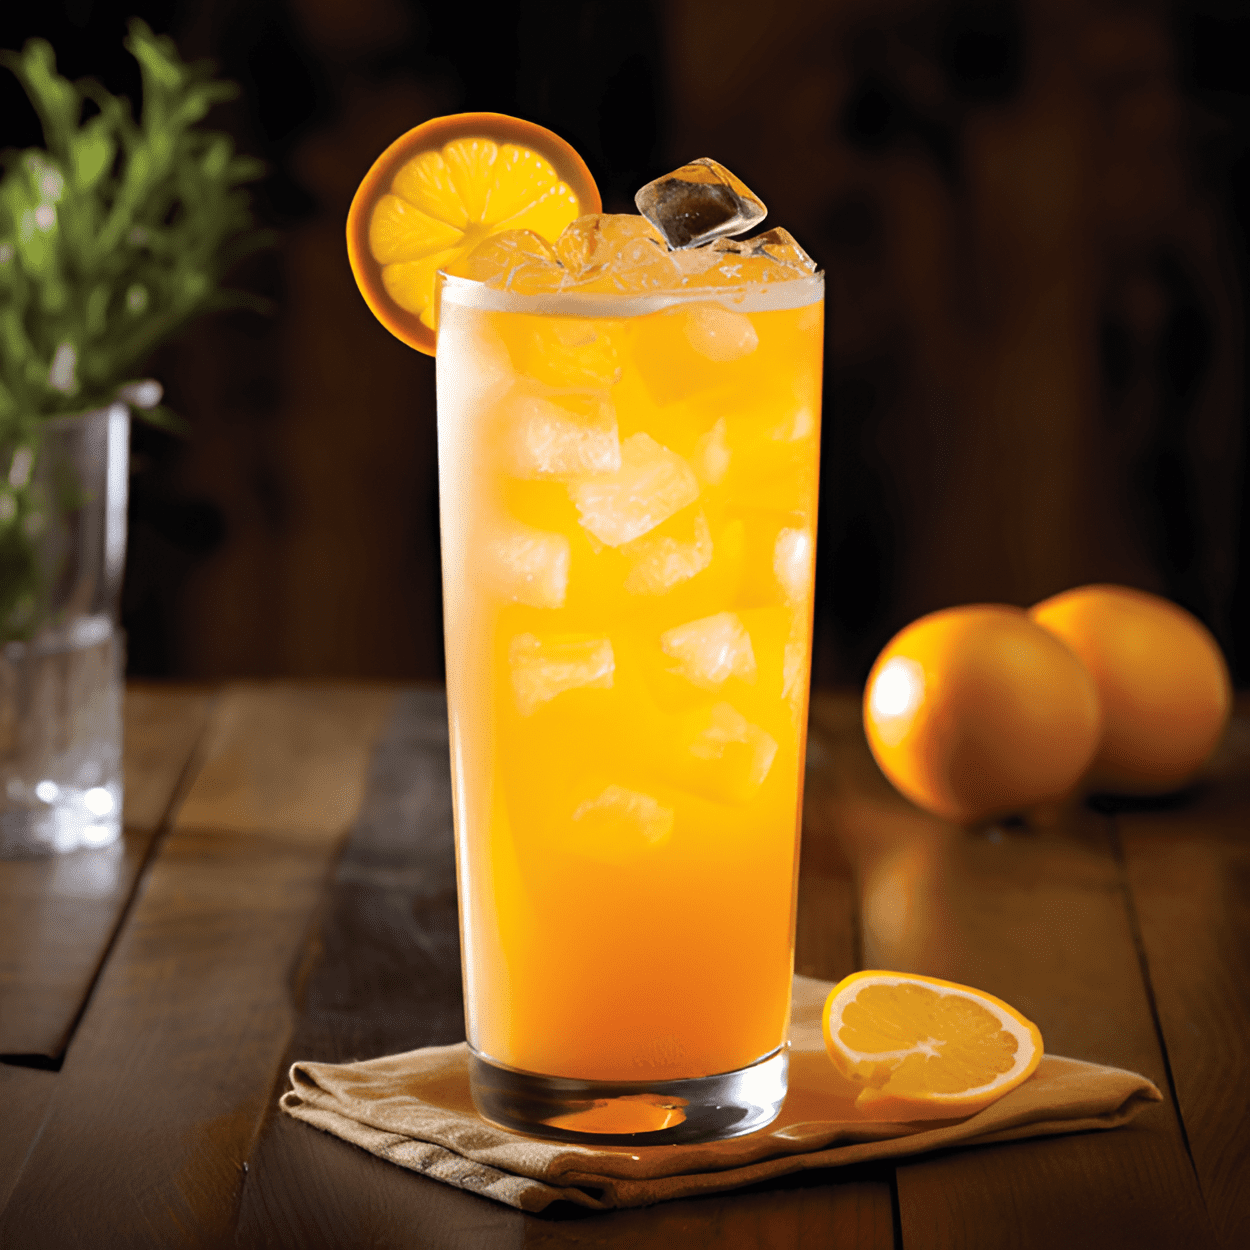 Nedicks Orange Cocktail Recipe - The Nedicks Orange cocktail is a delightful blend of sweet and tangy, with a hint of bitterness from the alcohol. The orange juice provides a fresh, citrusy taste, while the sugar syrup adds a touch of sweetness to balance out the flavors.